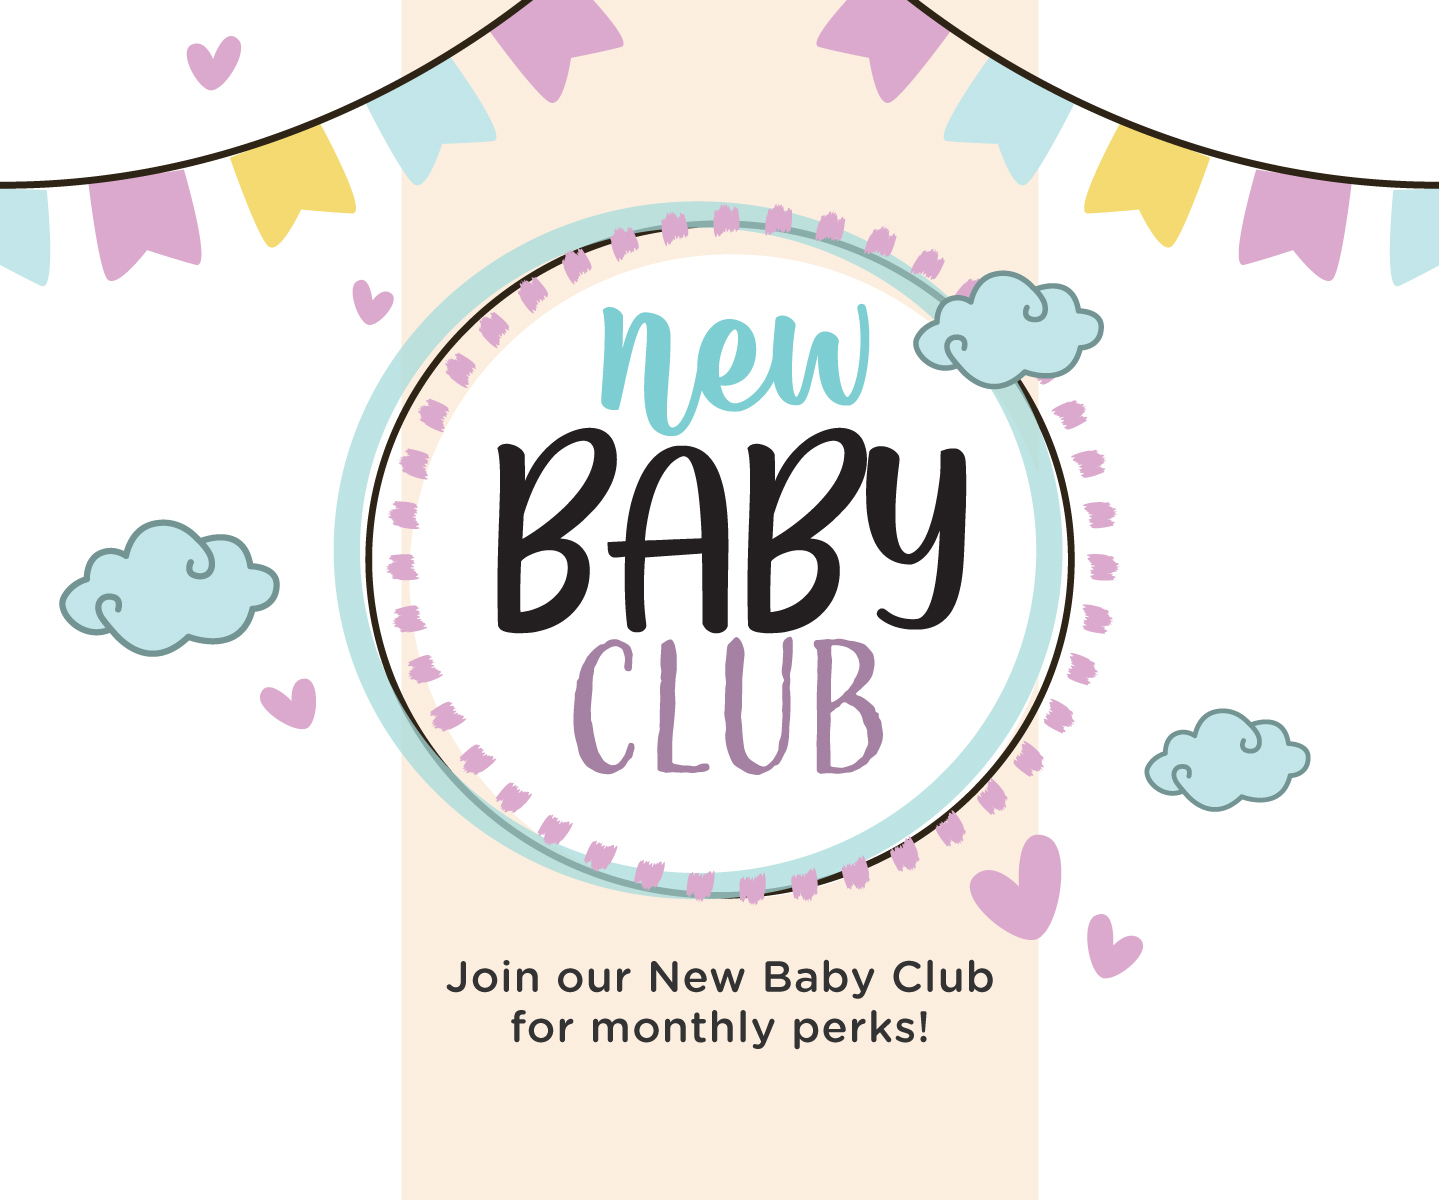 New Baby Club Offer